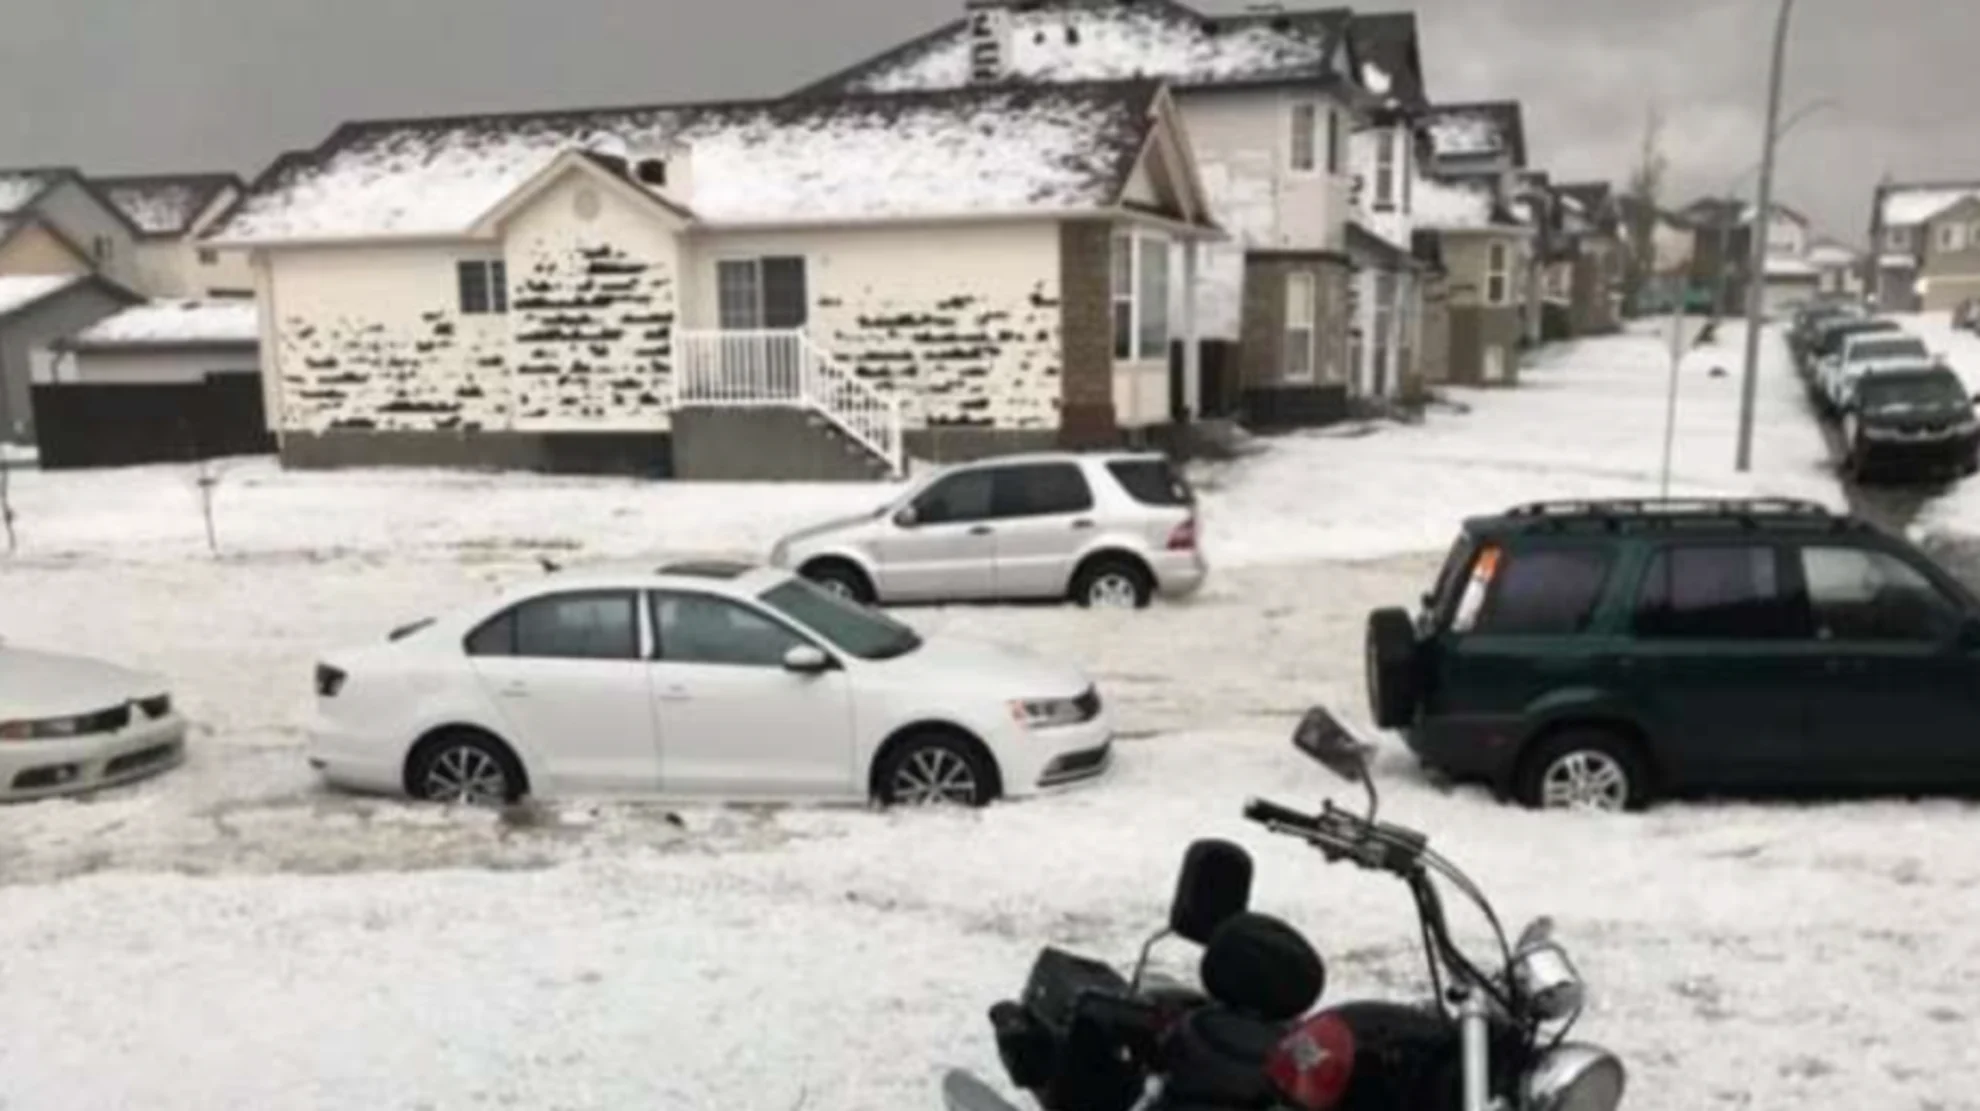 Calgary's 2020 hailstorm is Canada's 4th costliest natural disaster